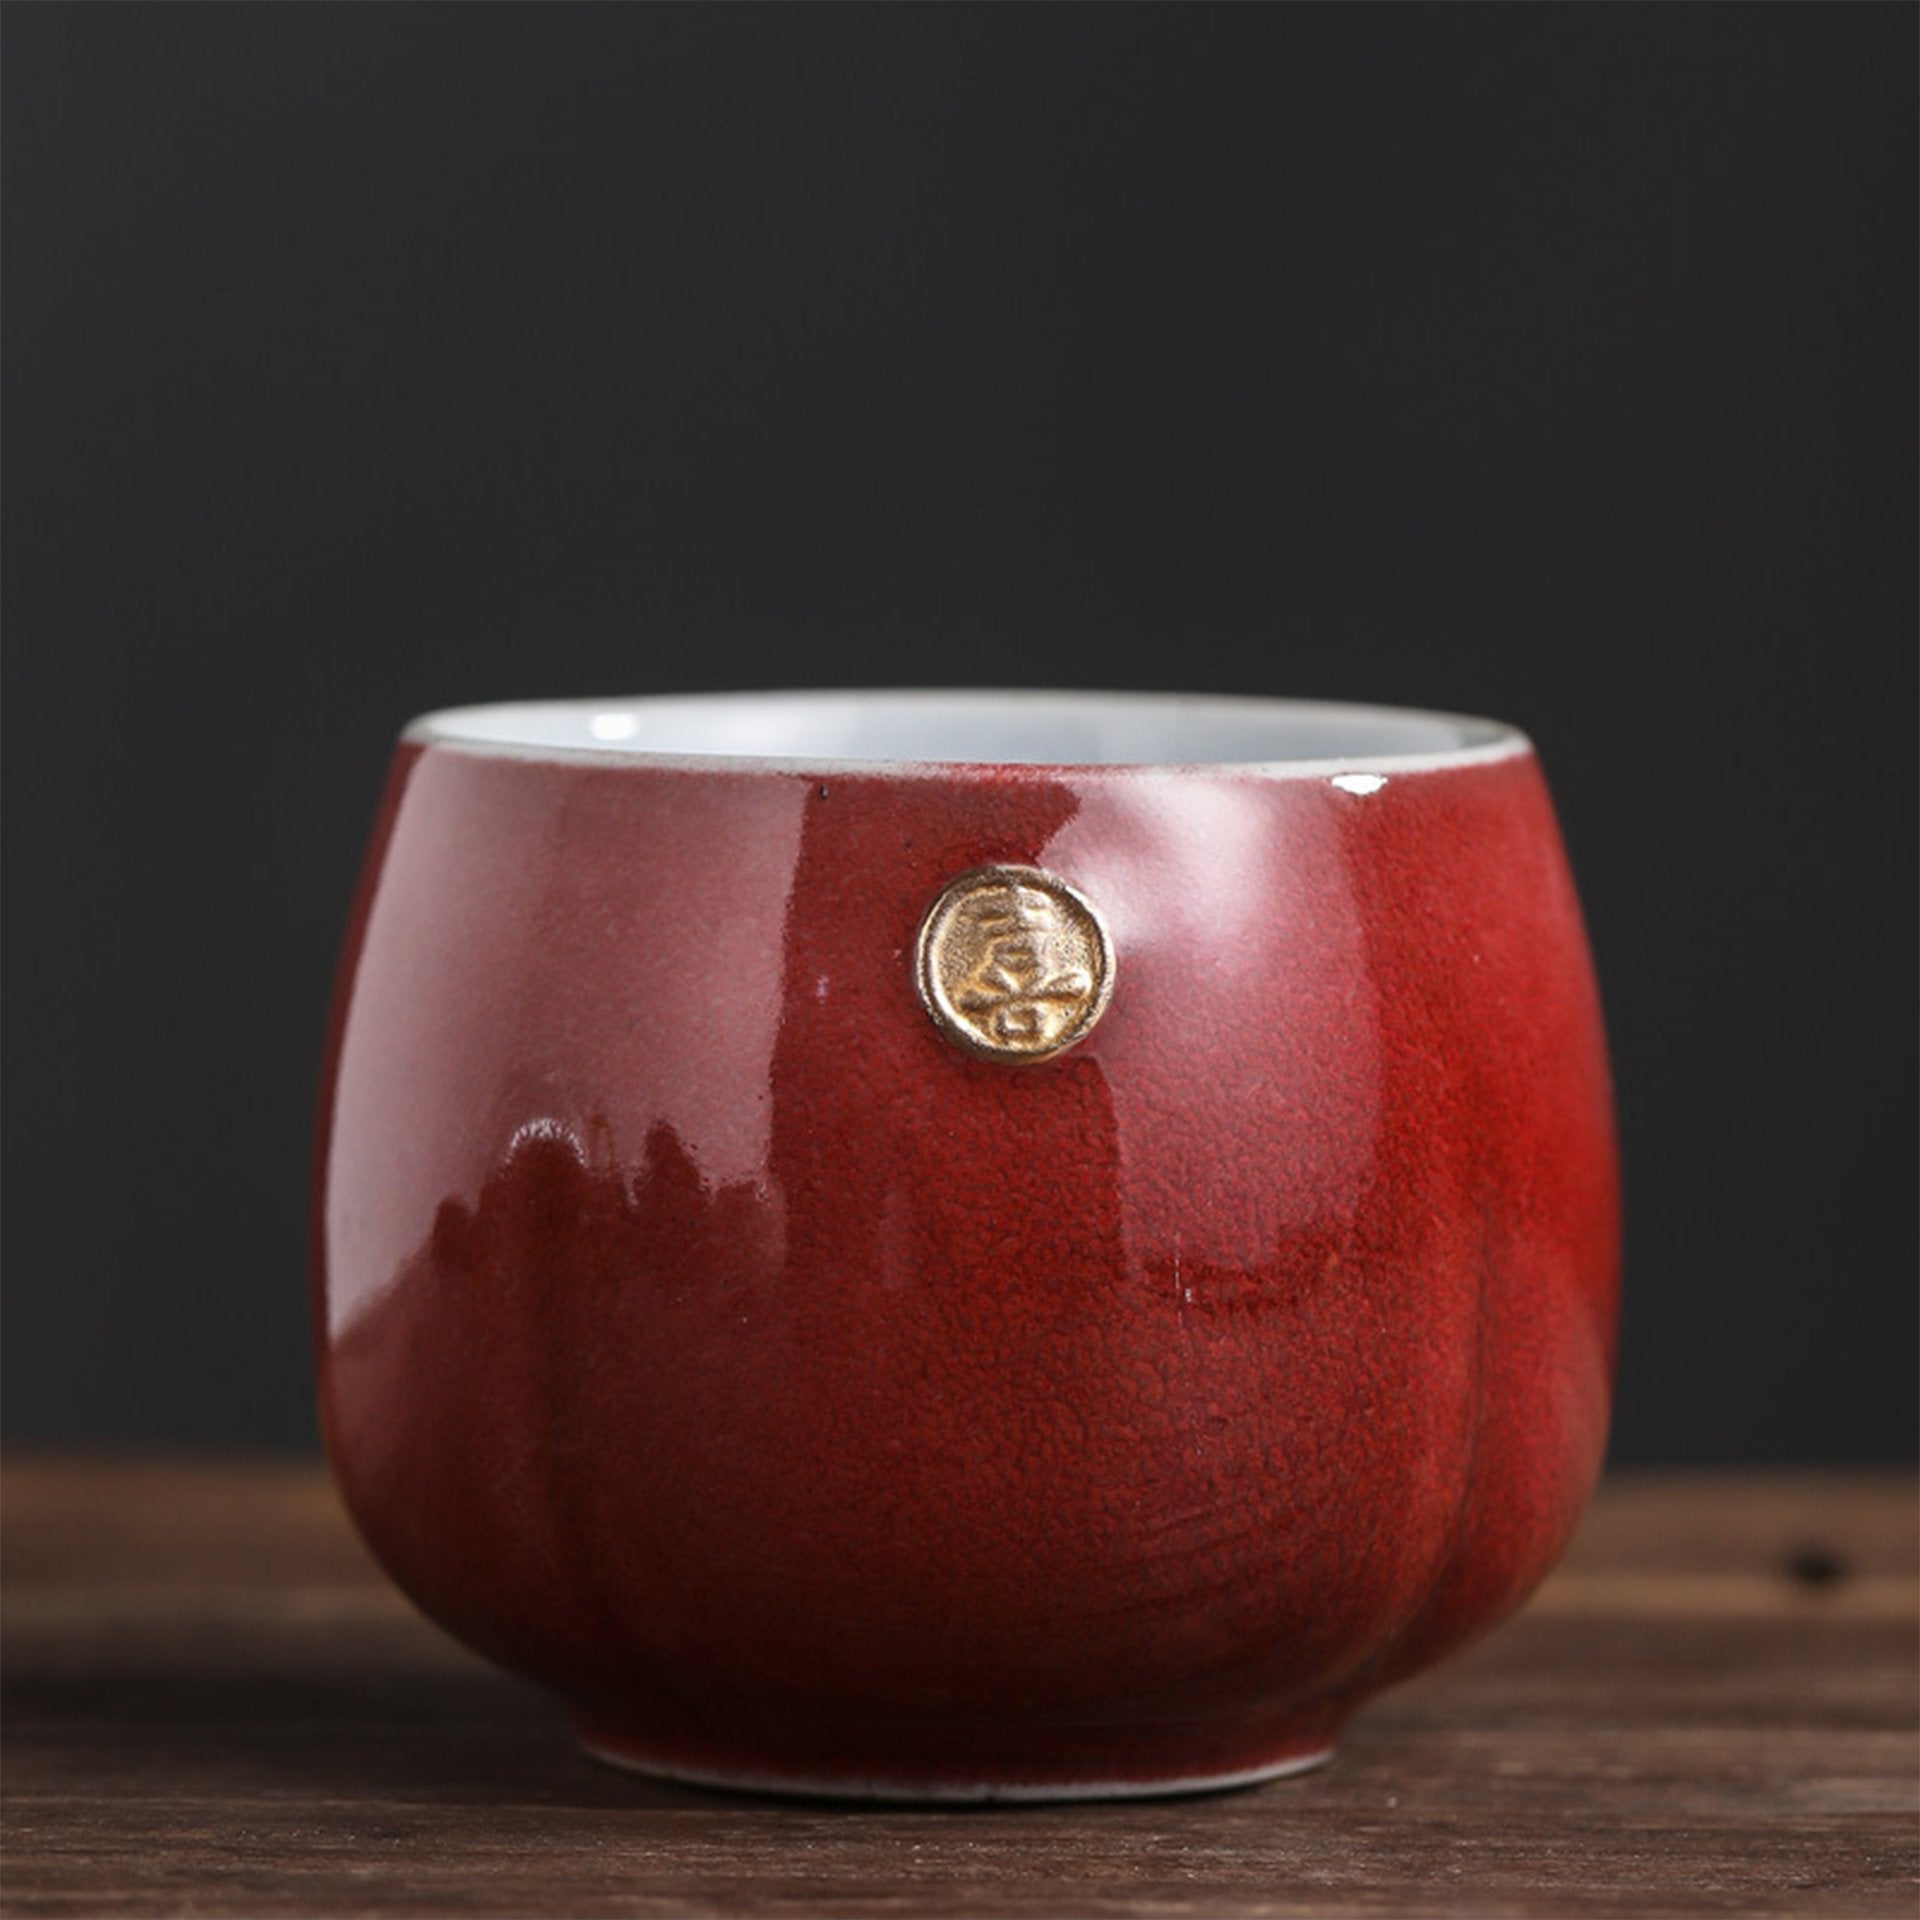 Glossy red Japanese teacup with a gold seal against a dark background.